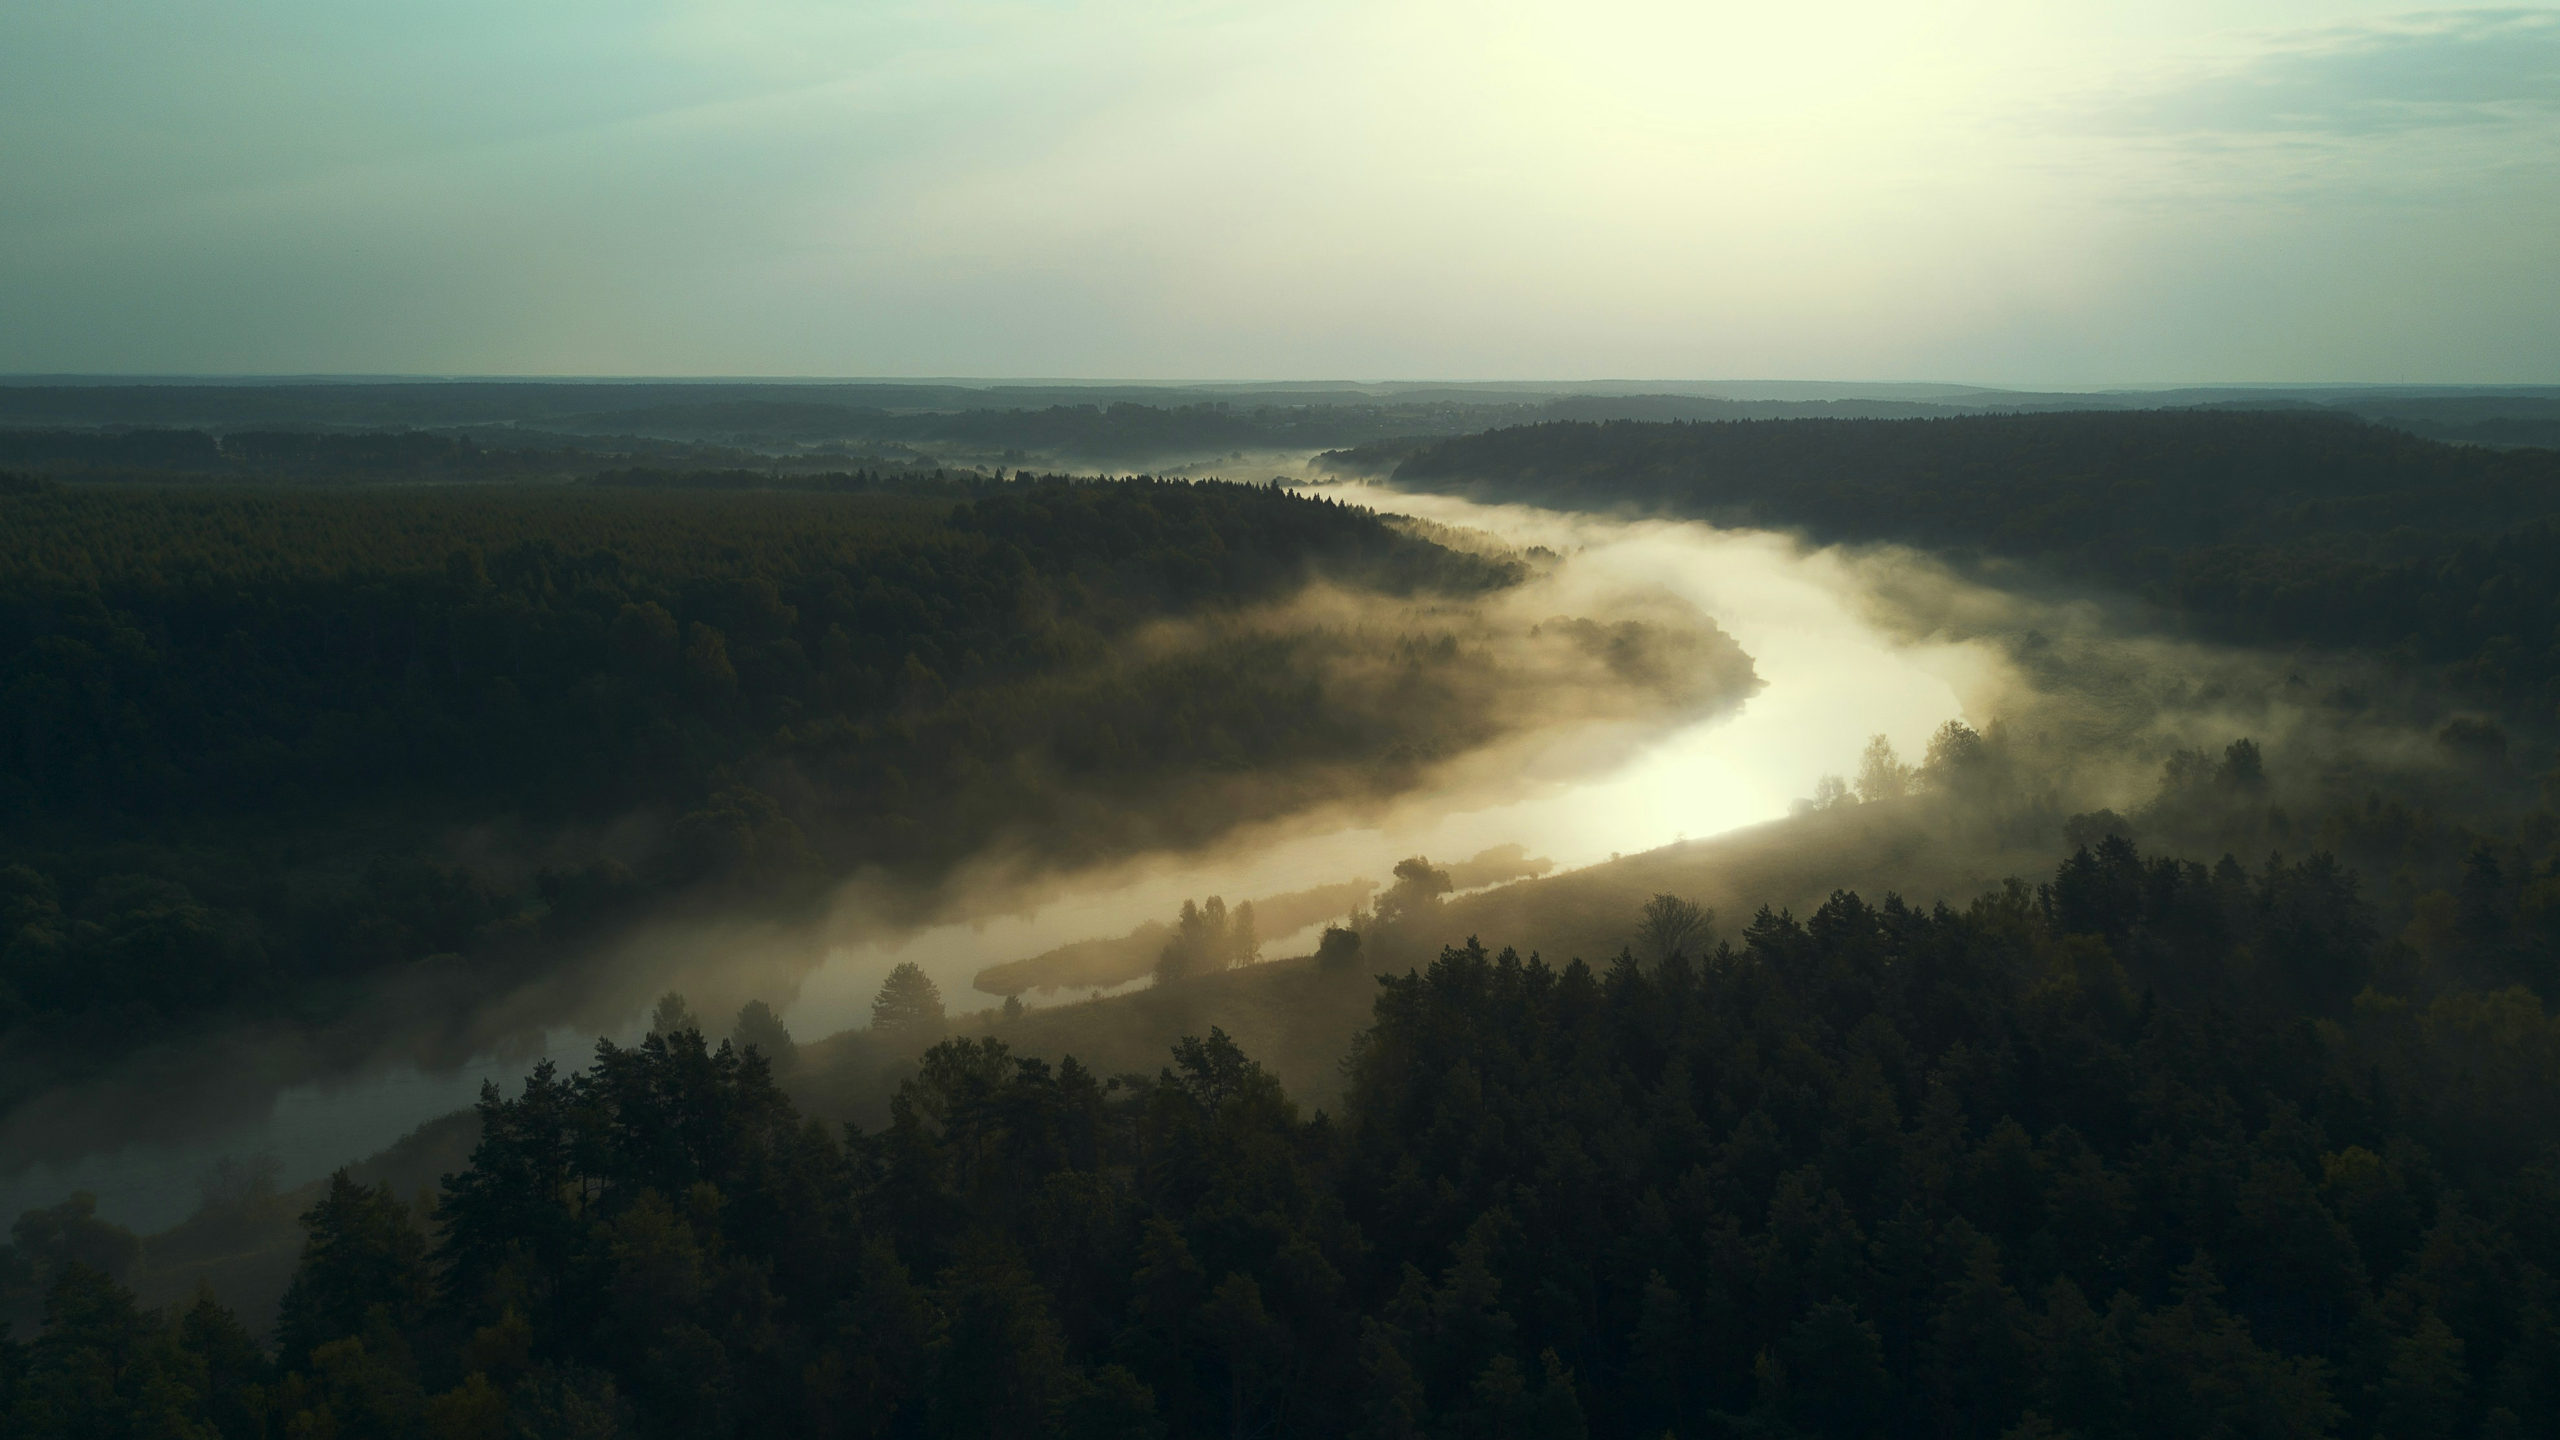 General 2560x1440 nature landscape trees forest mist river sky clouds fog far view horizon hills sunrise aerial view Russia Nick Kulyakhtin